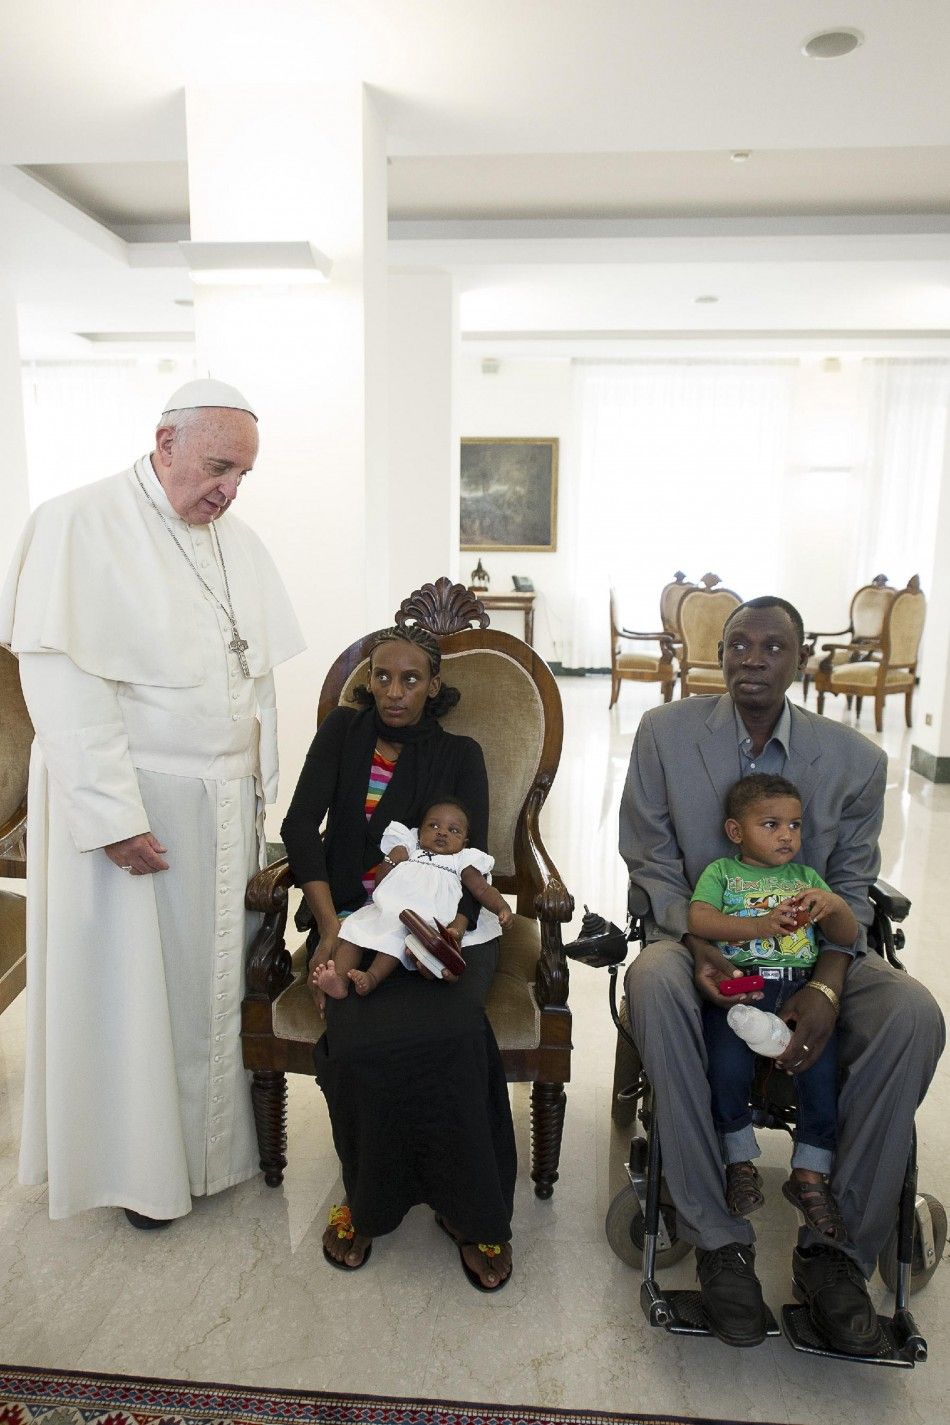 Pope Francis poses with Mariam Yahya Ibrahim of Sudan C, her husband and two children during a private meeting at the Vatican July 24, 2014. The Sudanese woman, who was spared a death sentence for converting from Islam to Christianity and then barred fr